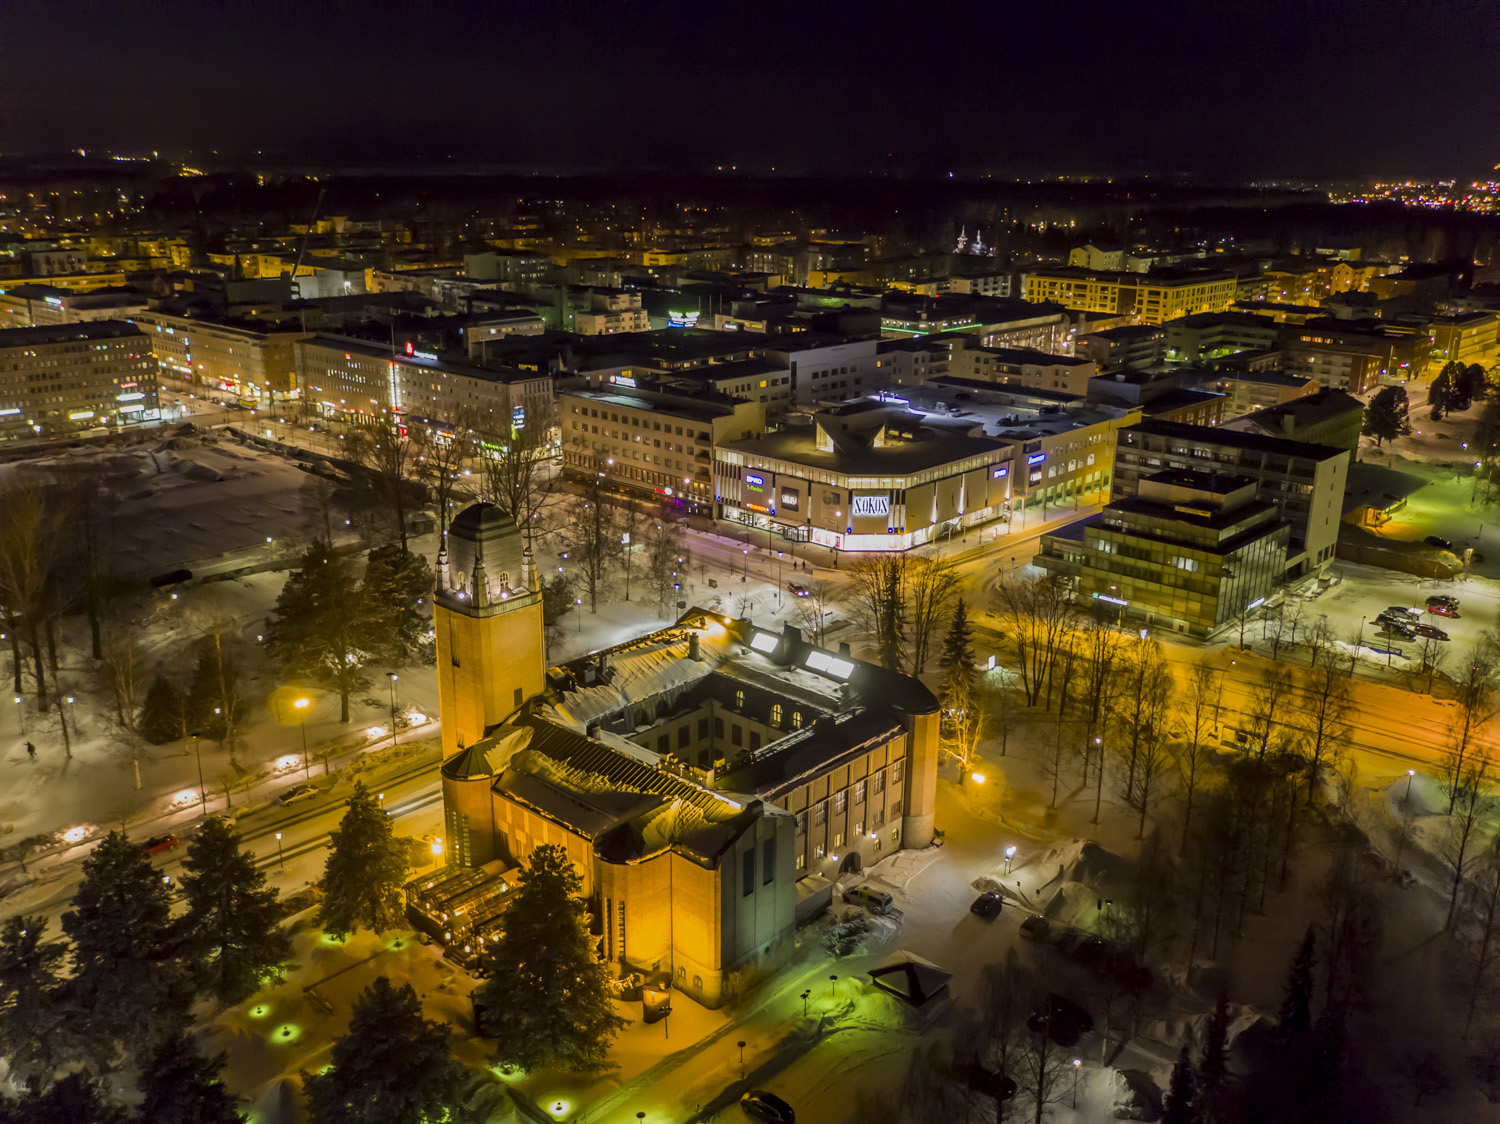 Funding call: How to increase the attraction of Joensuu, the city needs your ideas – apply by 3 Dec